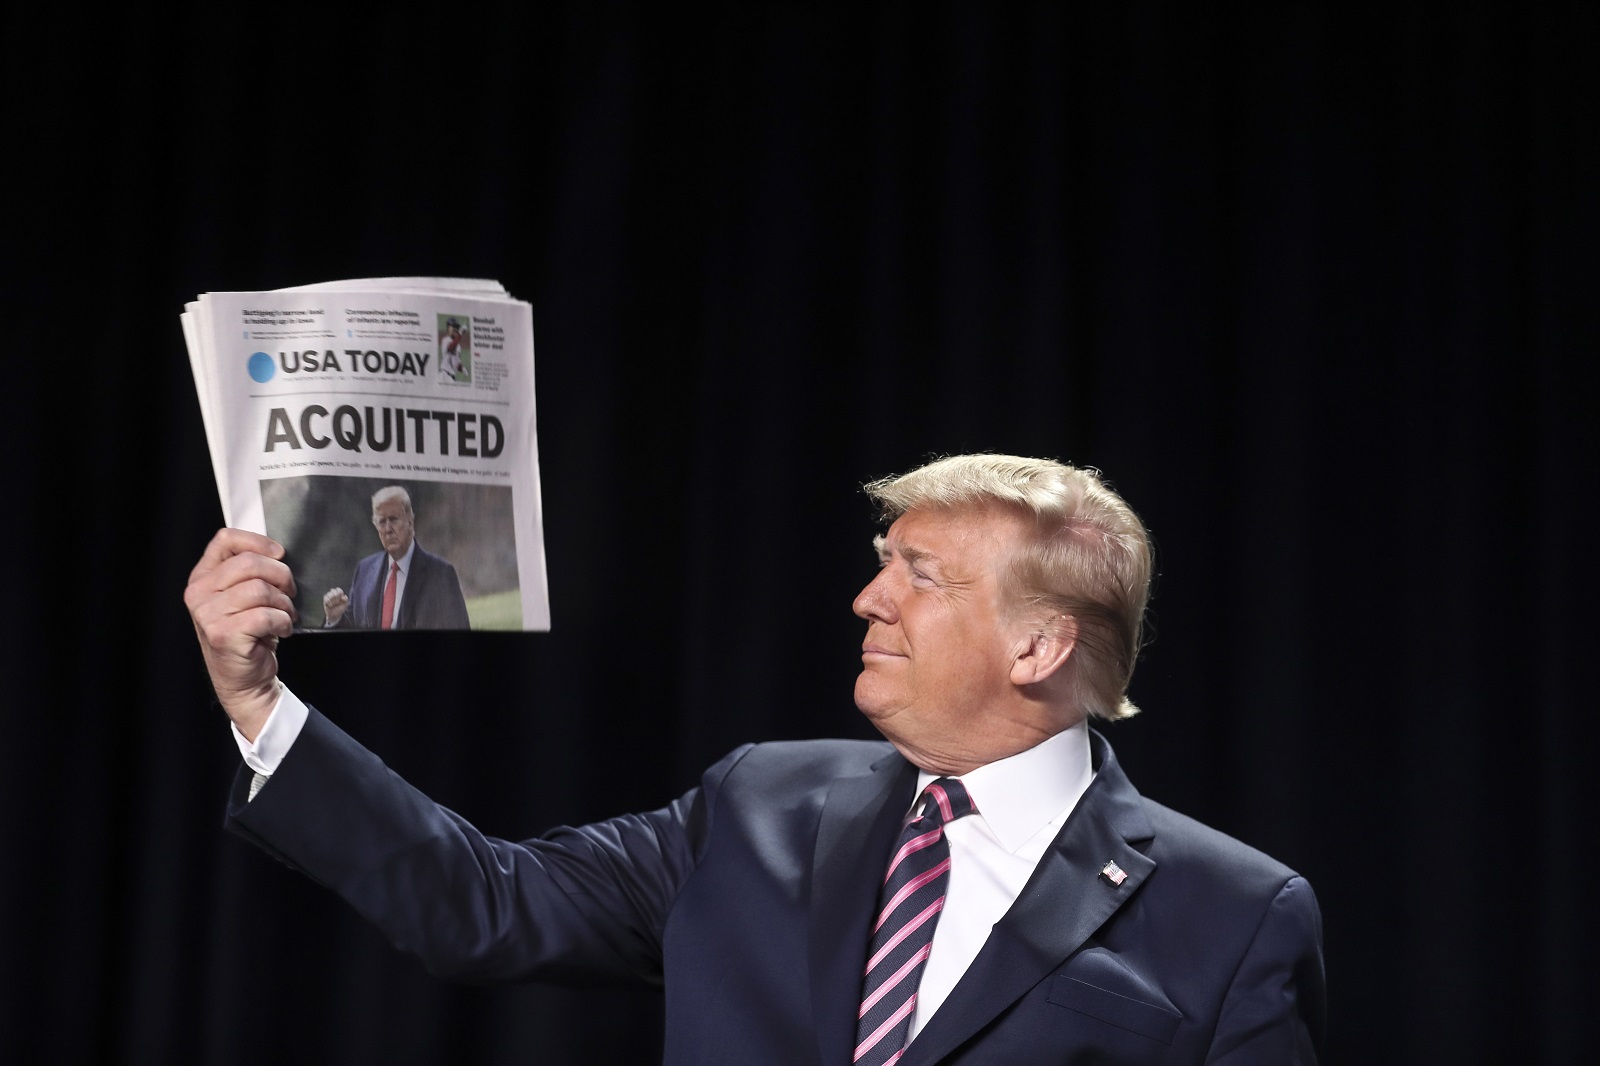 epa09010714 (FILE) - US President Donald J. Trump holds a copy of the USA Today newspaper fronting with his impeachment acquittal, as he arrives to the 68th Annual National Prayer Breakfast in Washington, DC, USA, 06 February 2020 (reissued 13 February 2021). The US Senate on 13 February 2021 voted to acquit former US president Trump in his second impeachment trial held on the charge of incitement of insurrection for his role in 06 January violent attack on the US Capitol.  EPA/Oliver Contreras / POOL *** Local Caption *** 55853899